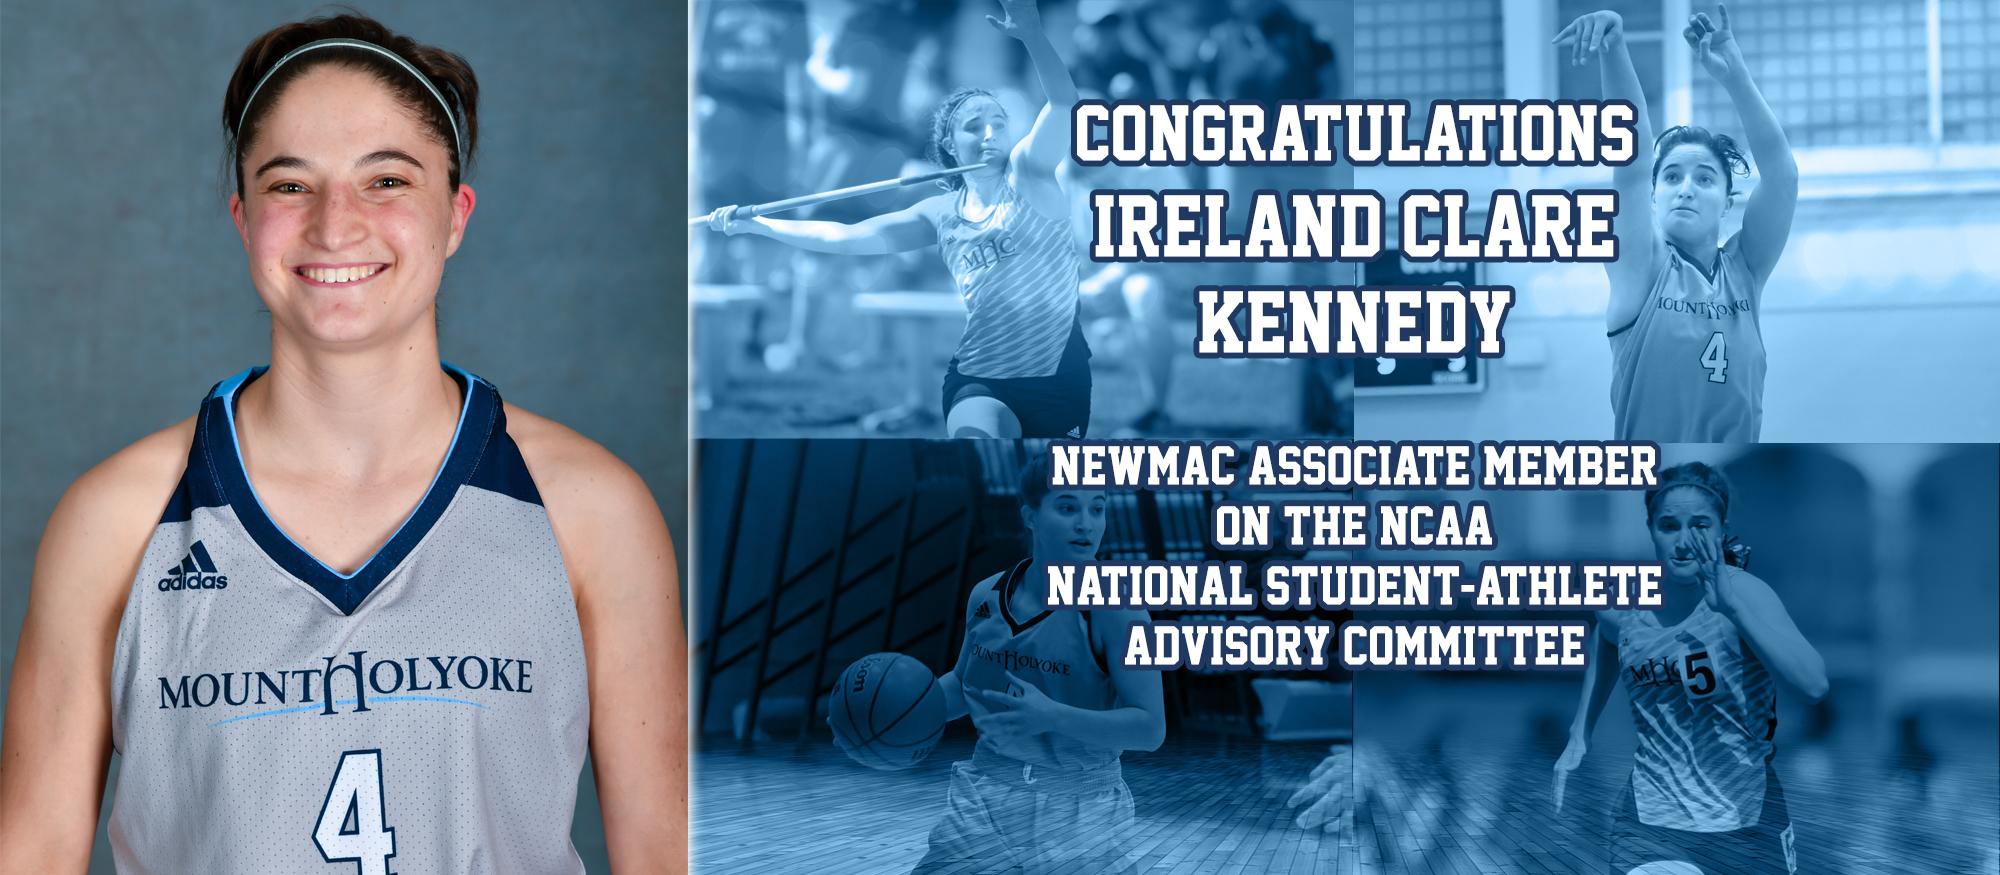 Image promoting Lyons basketball/track & field student-athlete, Ireland Clare Kennedy who was named the Associate Member for the NEWMAC to the National Student-Athlete Advisory Committee